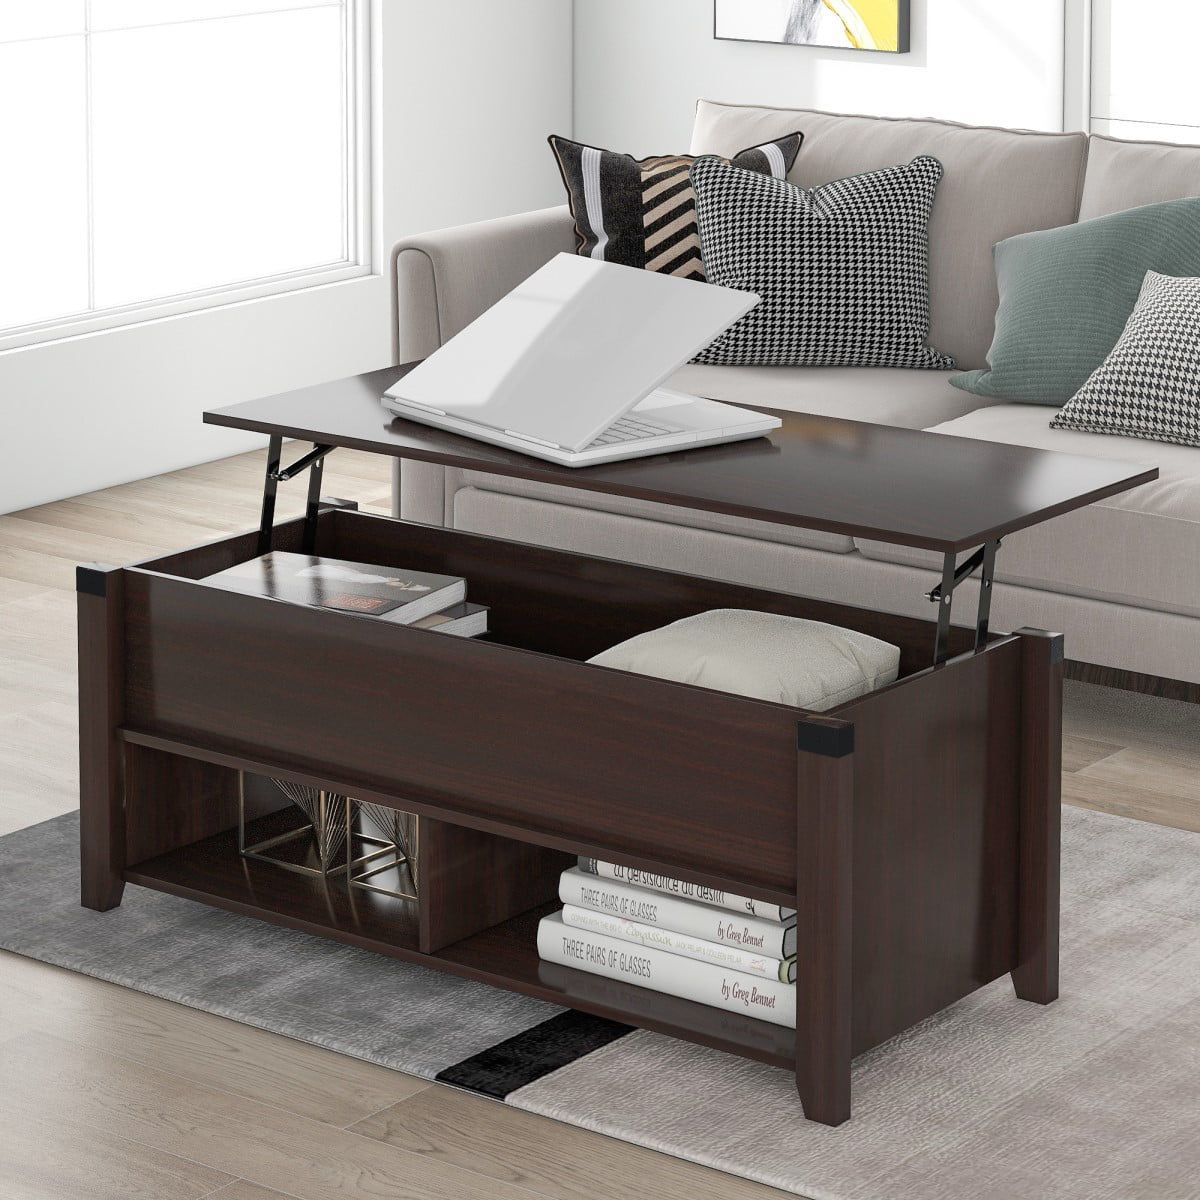 Small Space Lift Top Coffee Table With 2 Storage Compartments, Espresso Within Lift Top Coffee Tables With Shelves (Gallery 8 of 20)